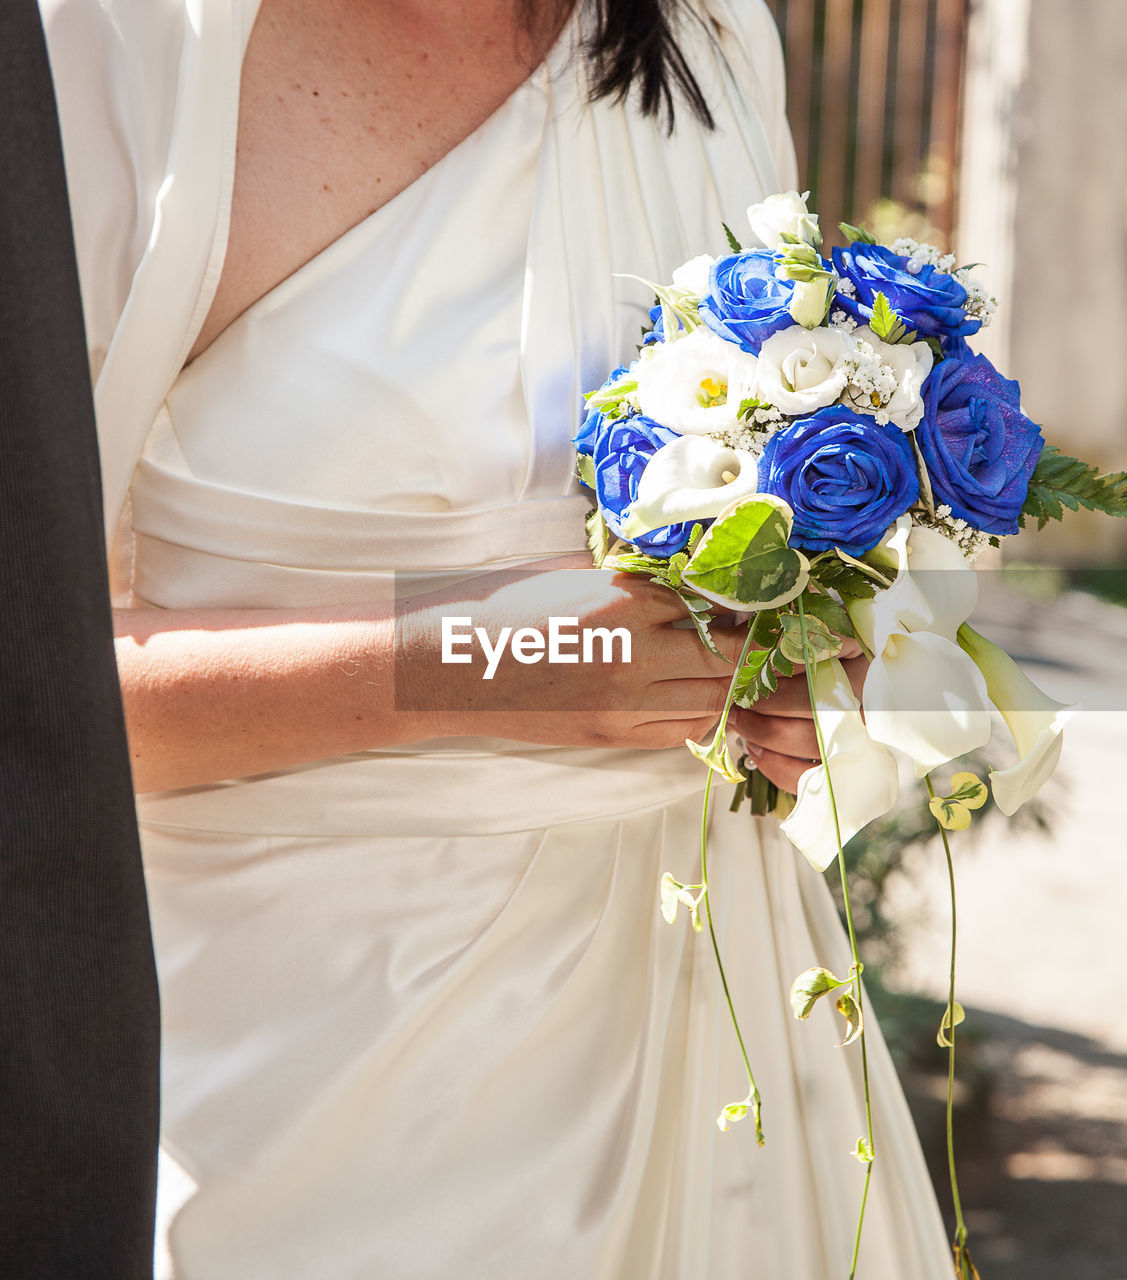 Midsection of bride holding flower bouquet during wedding